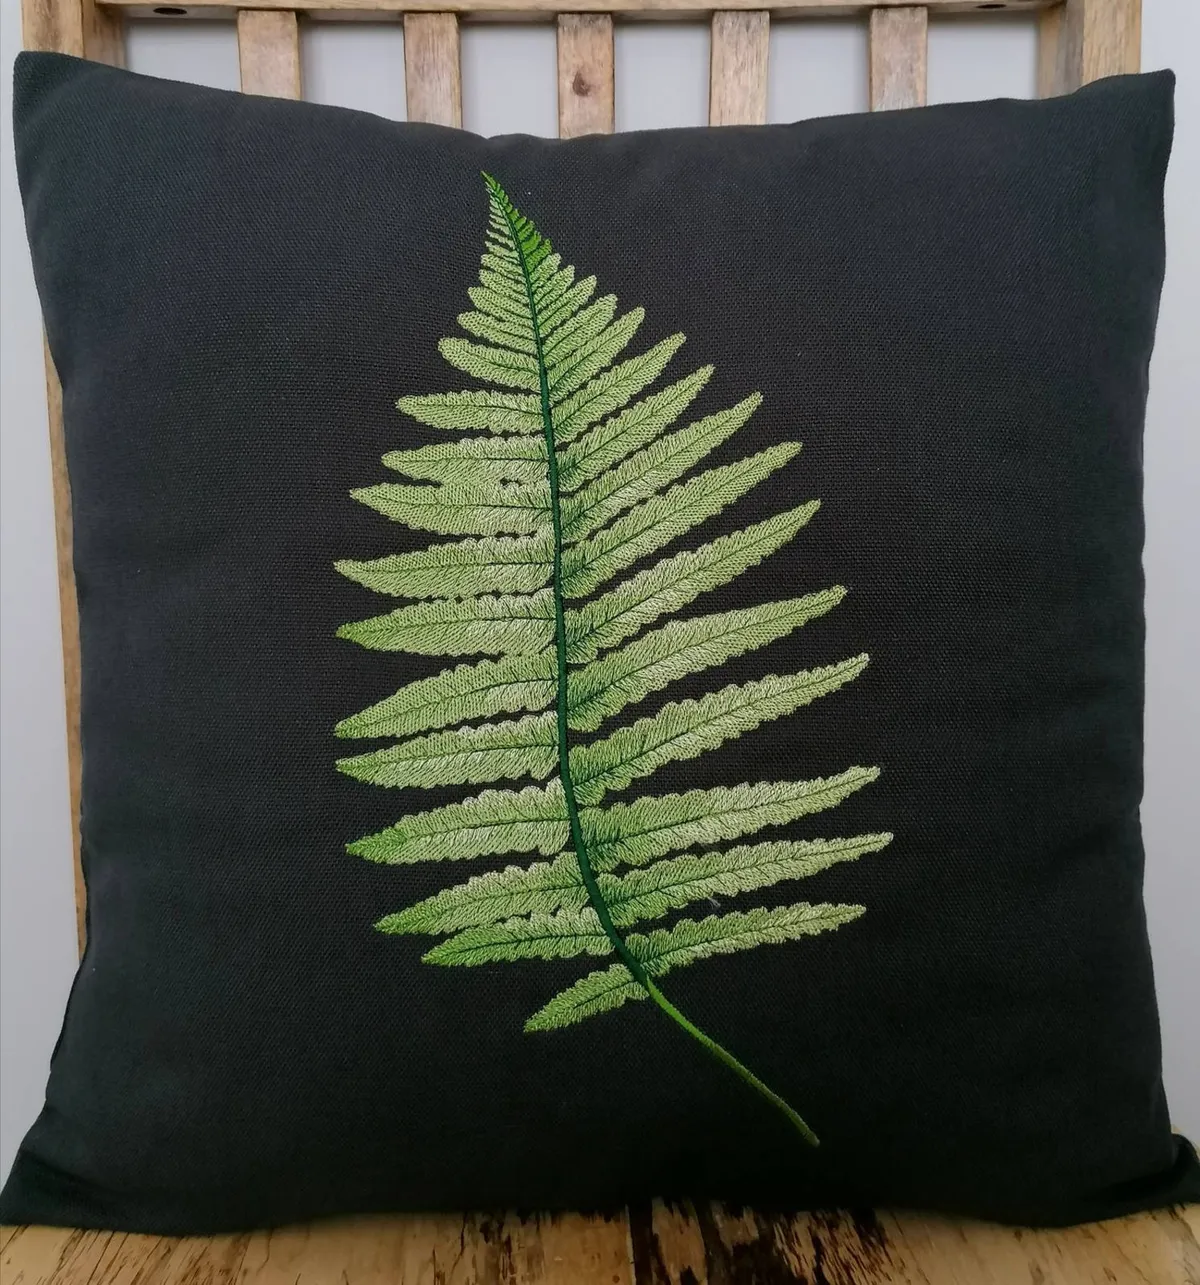 embroidered cushion with fern pattern